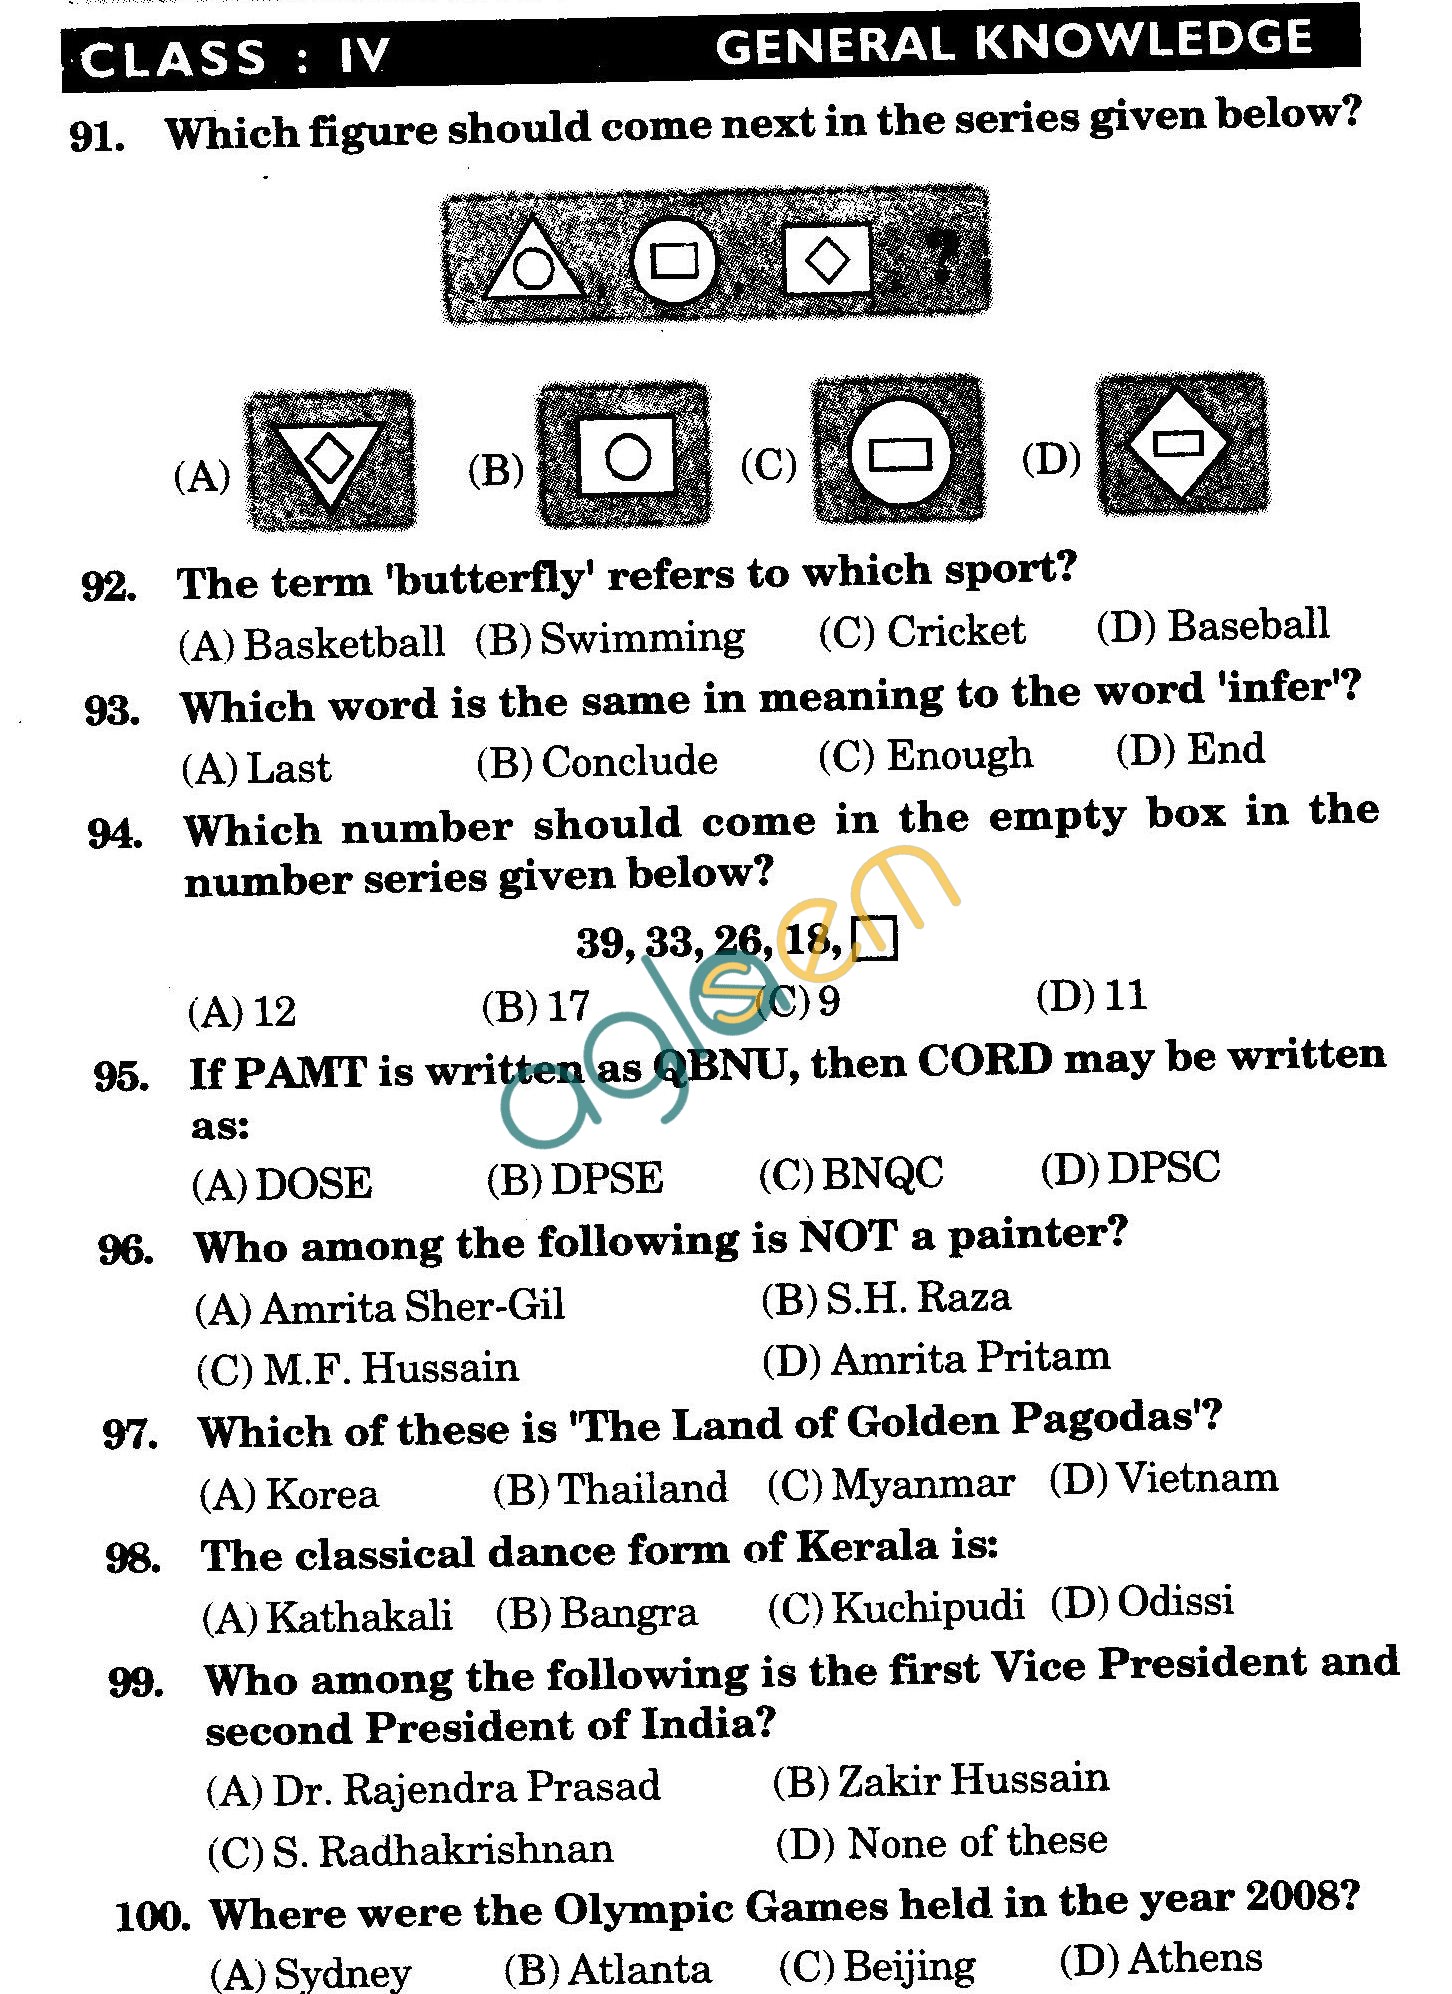 NSTSE 2009 Class IV Question Paper with Answers - General Knowledge